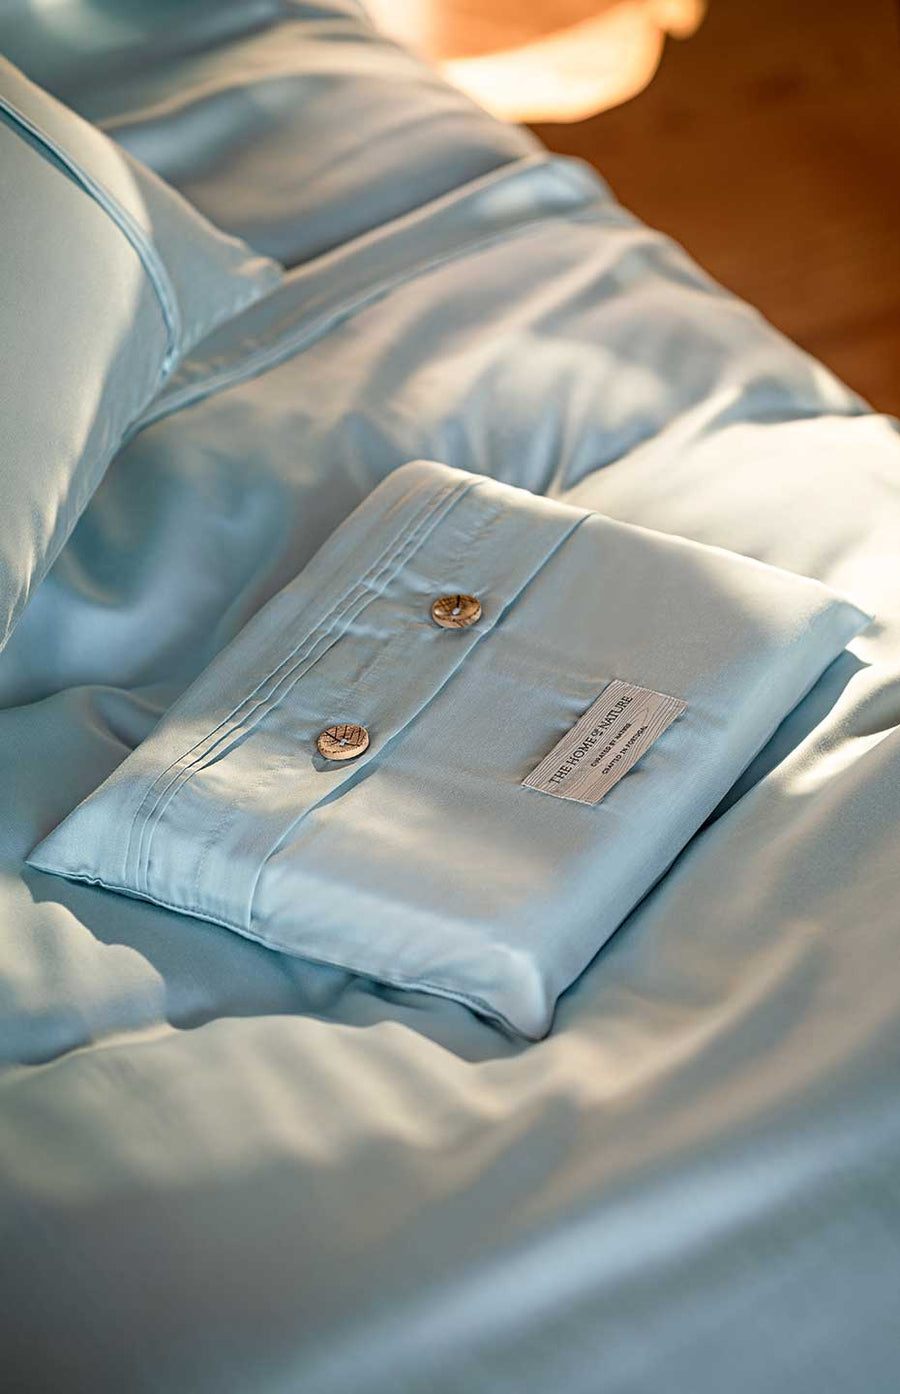 White eco-friendly packaging in TENCEL™ Lyocell from THON on top of a serene mint duvet cover.